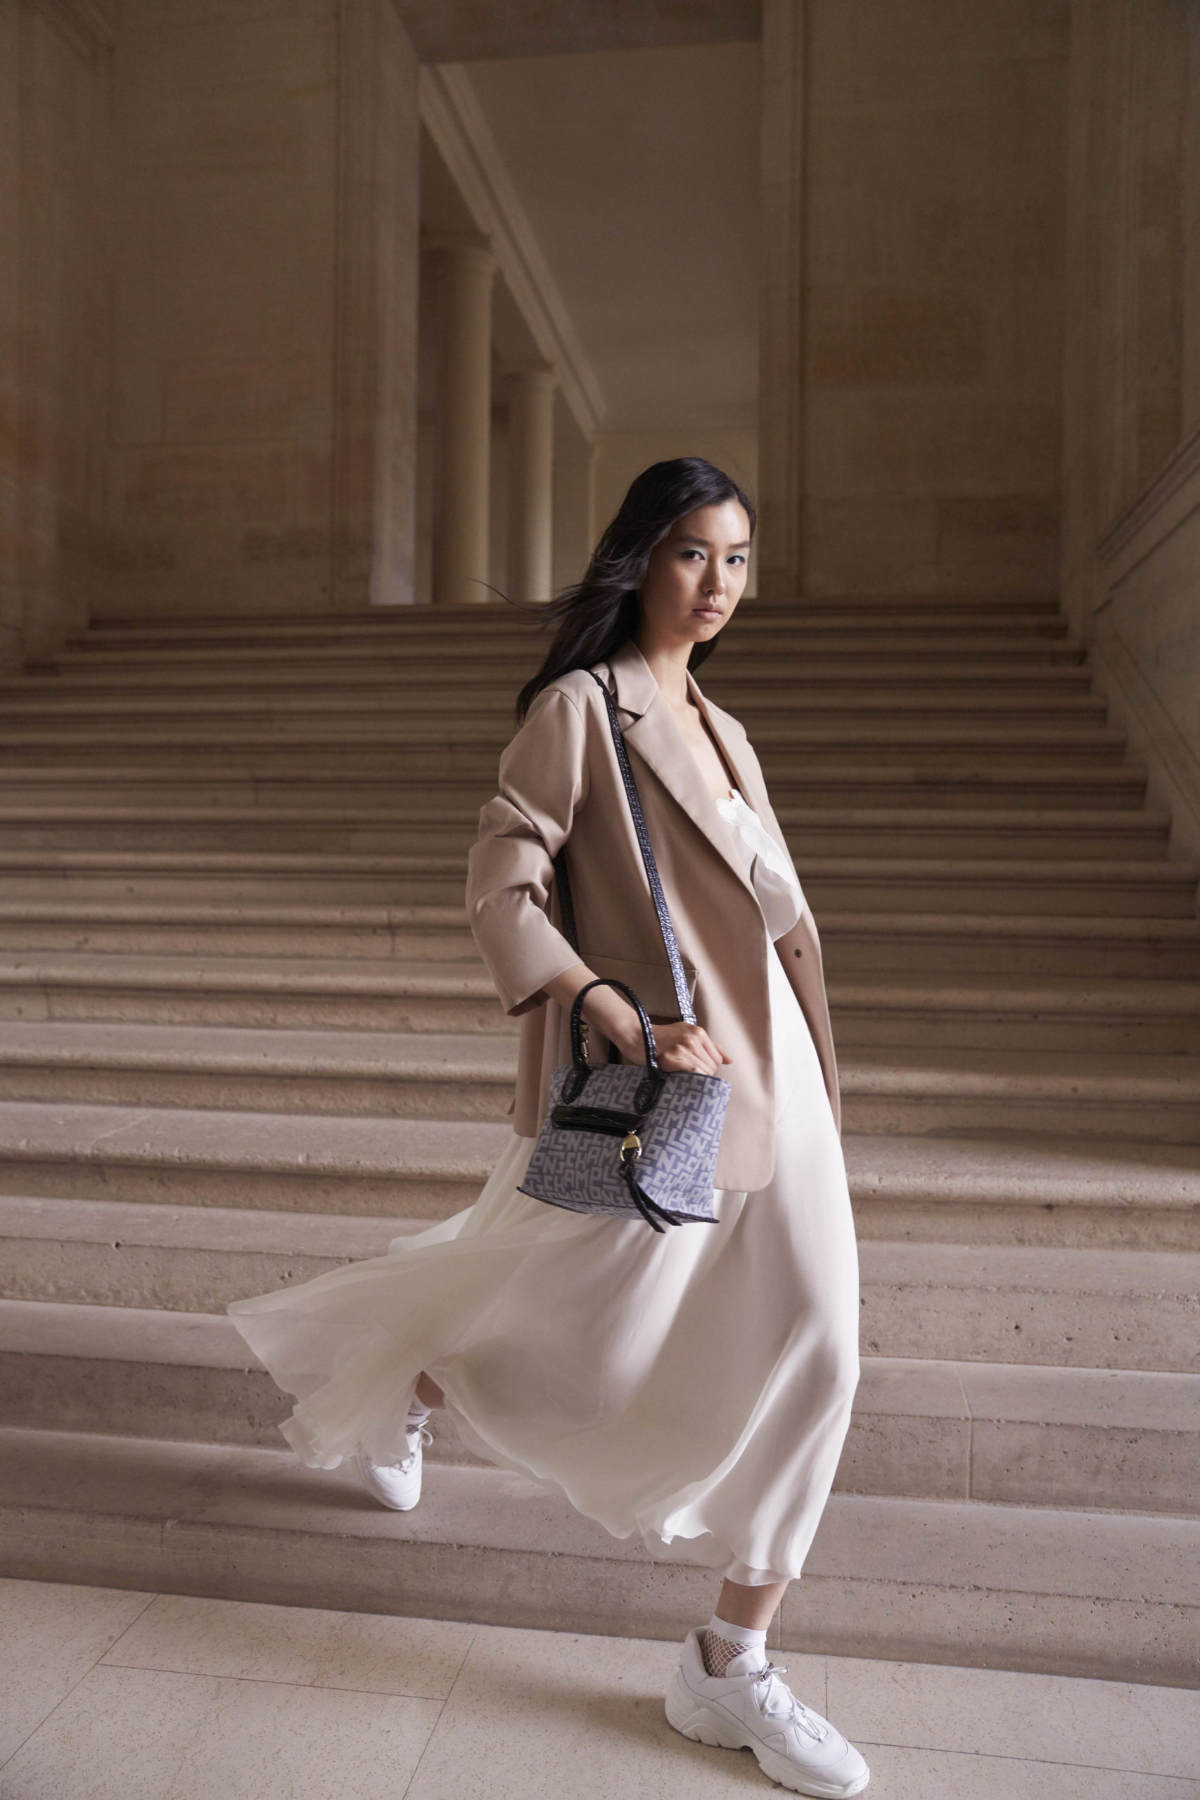 Not In Paris”: Longchamp Collaborates With Highsnobiety - Luxferity Magazine